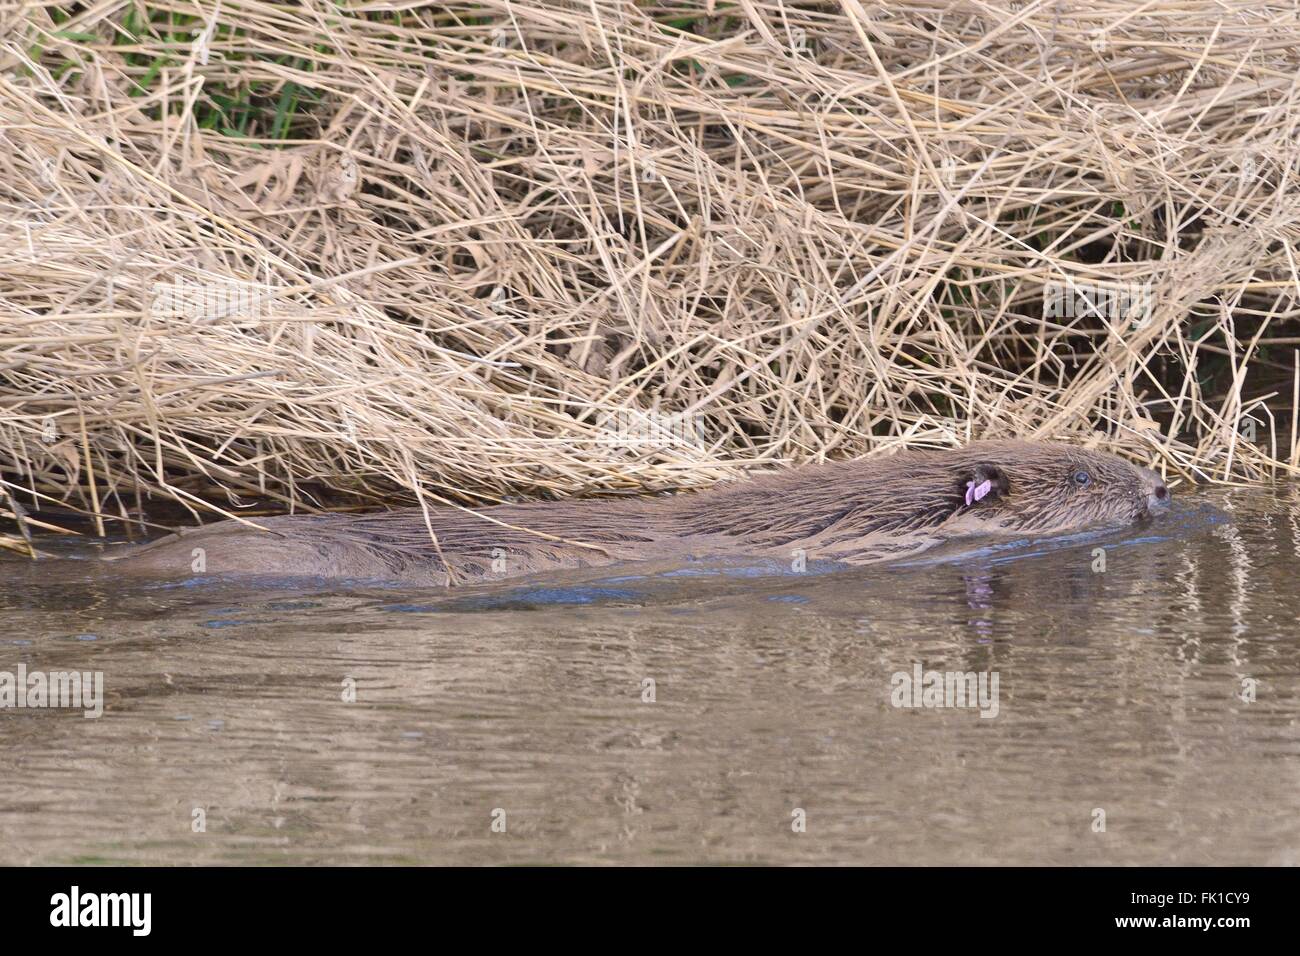 Eurasian beaver (Castor fiber) swimming in the River Otter after being checked for diseases and released back to its territory. Stock Photo